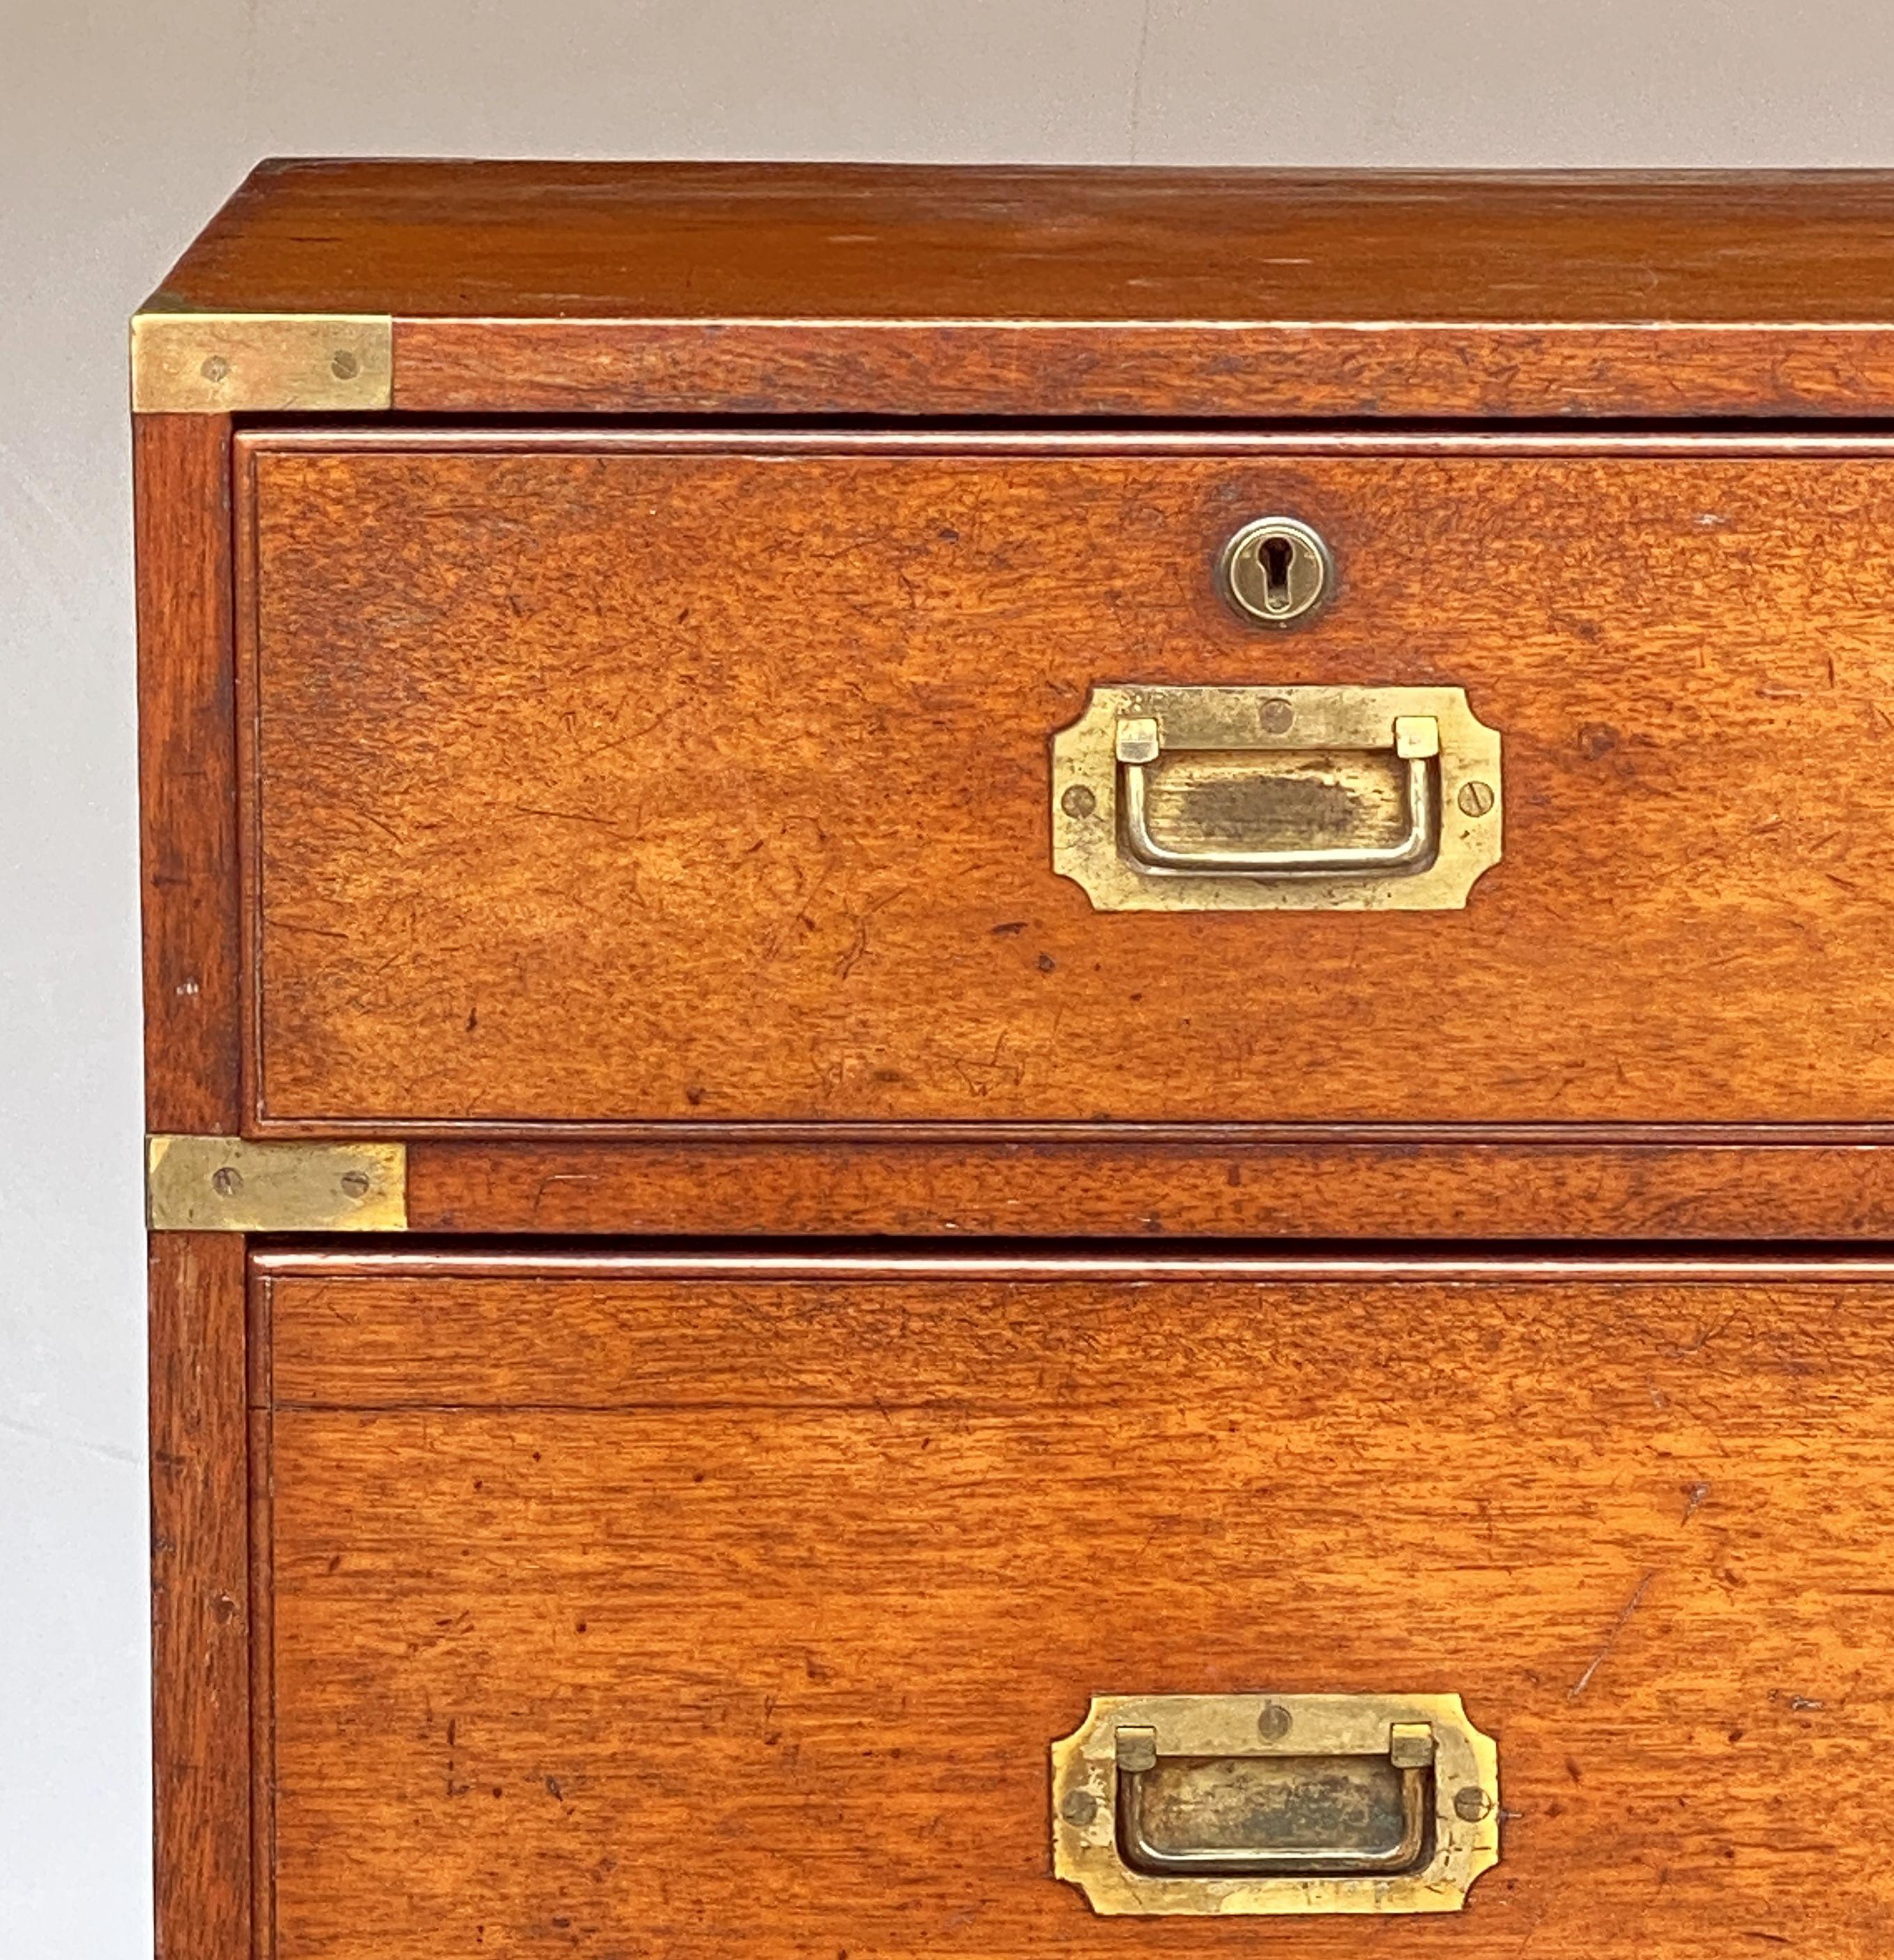 British Military Officer's Campaign Chest or Dresser of Brass-Bound Mahogany In Good Condition For Sale In Austin, TX